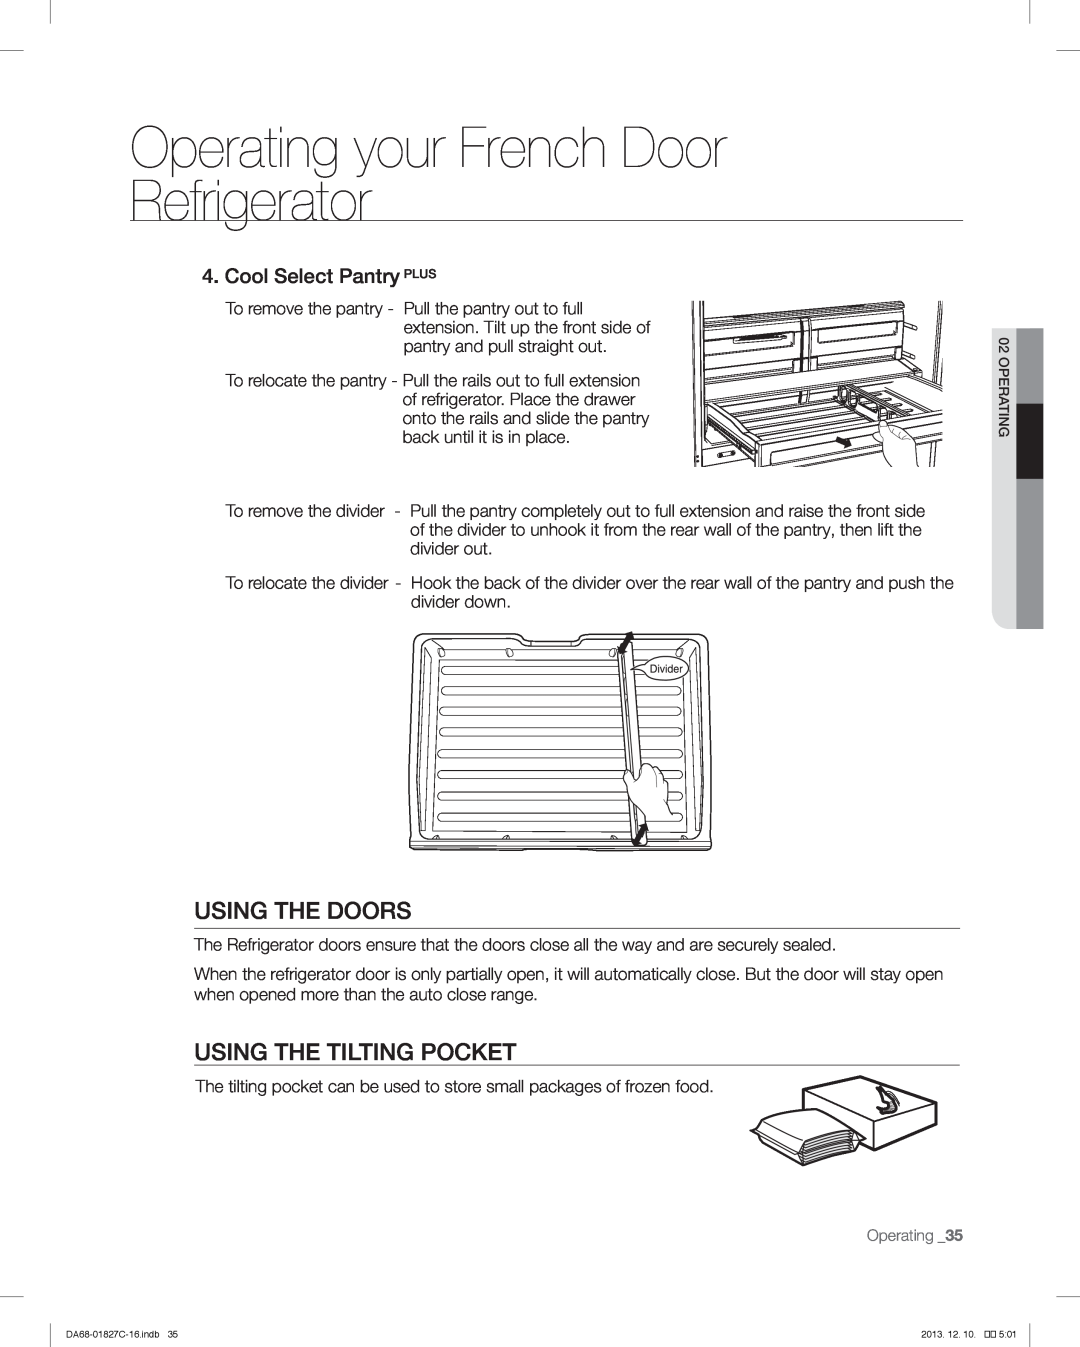 Samsung RFG237AARS user manual Using The Doors, Using The Tilting Pocket, Operating your French Door Refrigerator 